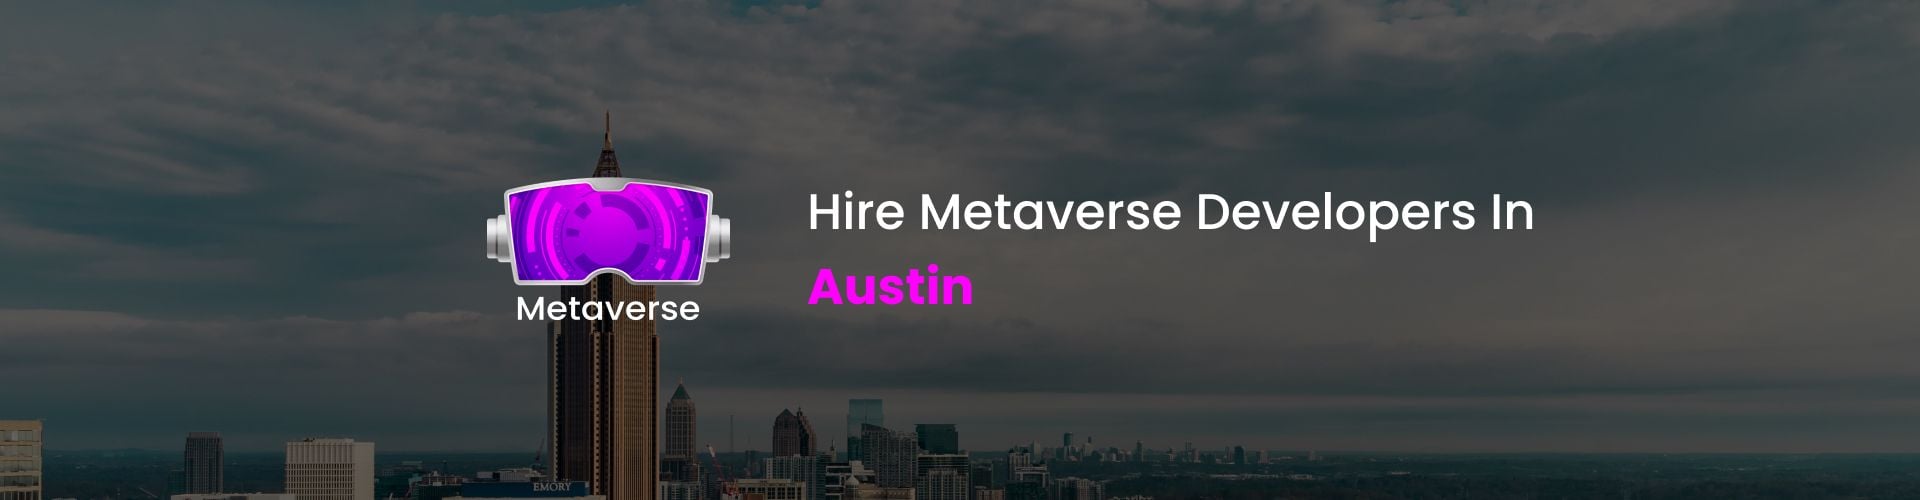 hire metaverse developers in austin